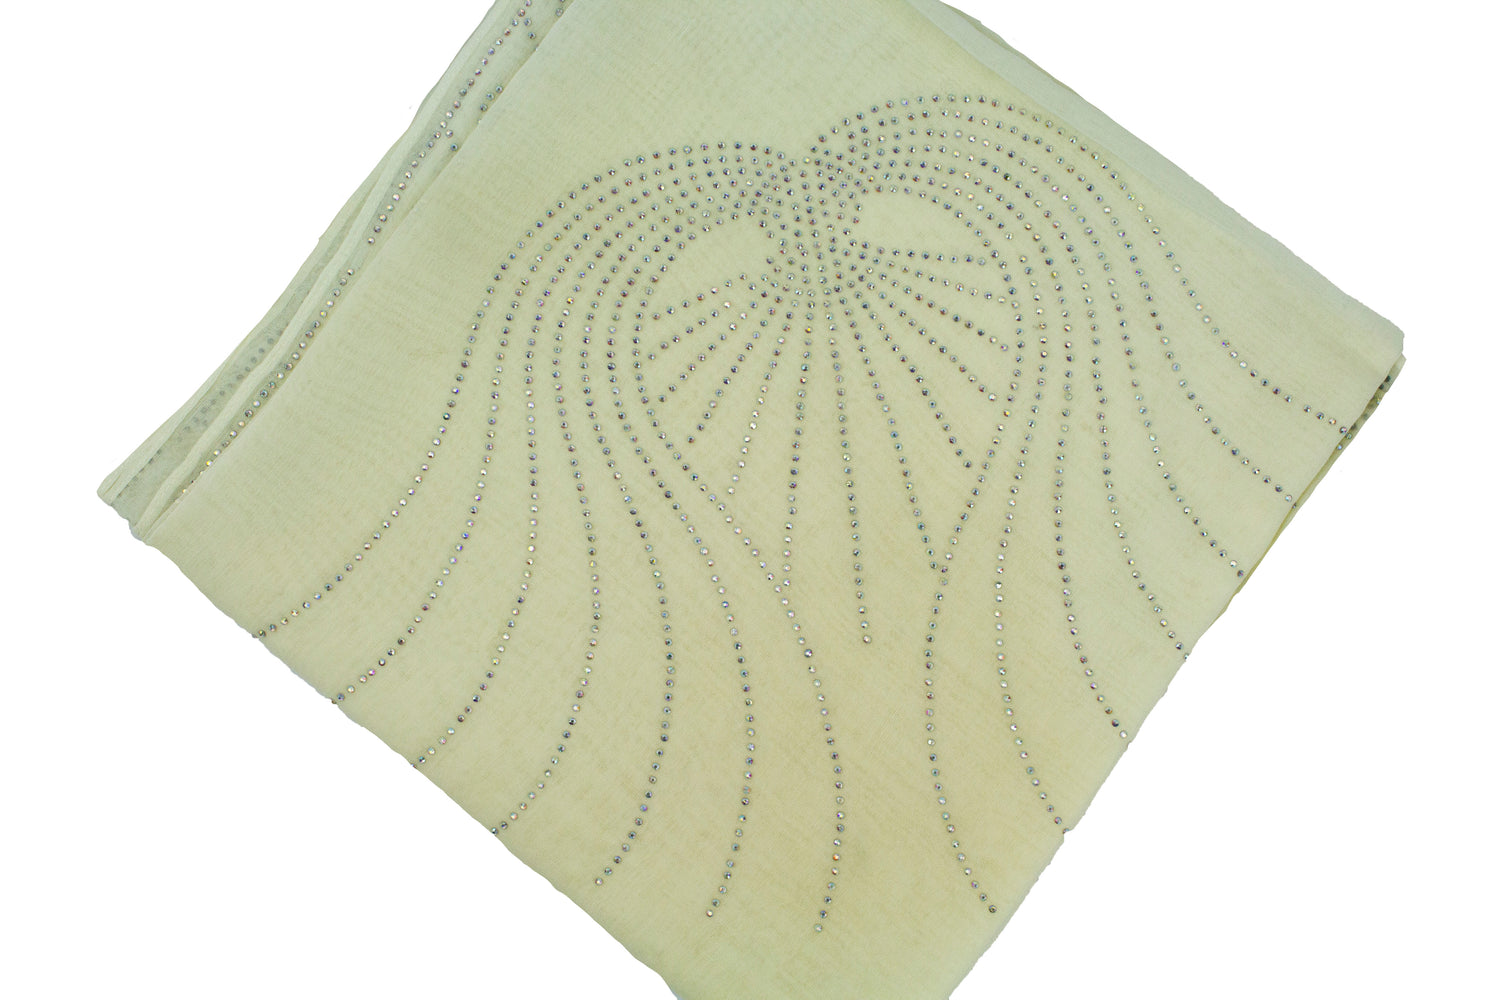 creme square hijab with jewels in angel wing pattern